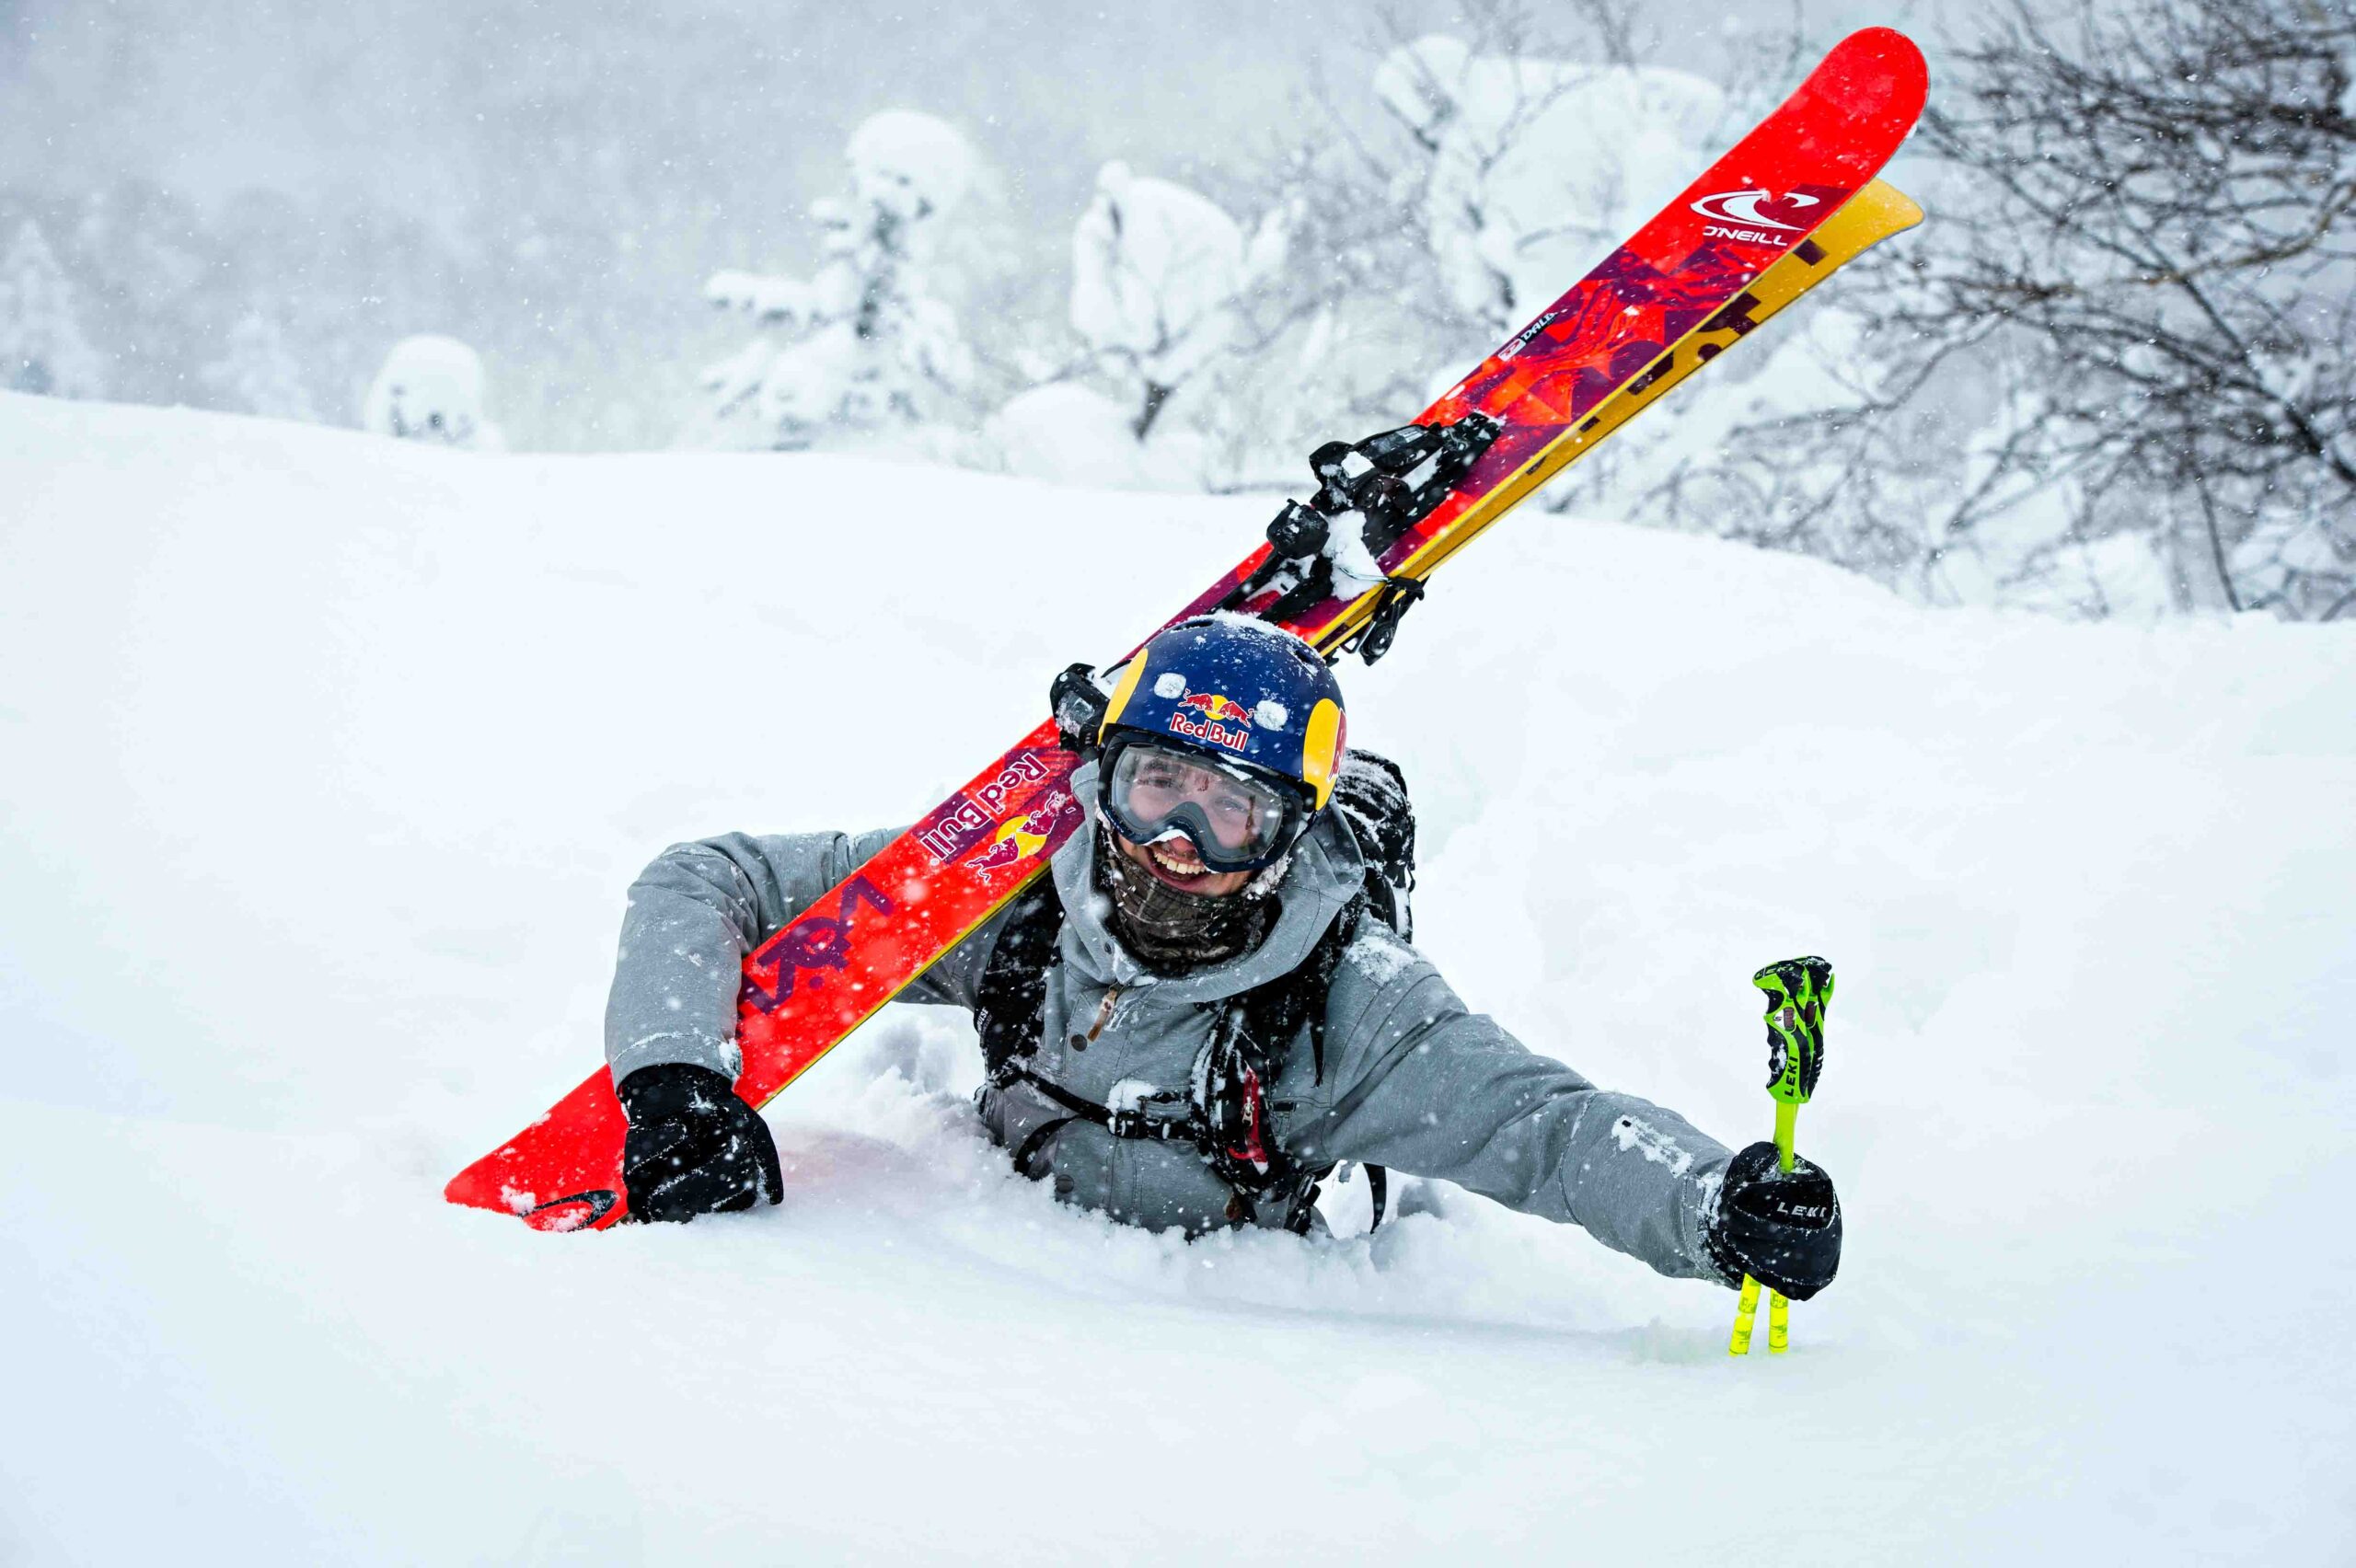 a skier wades chest deep through snow, orange skis carried on shoulder